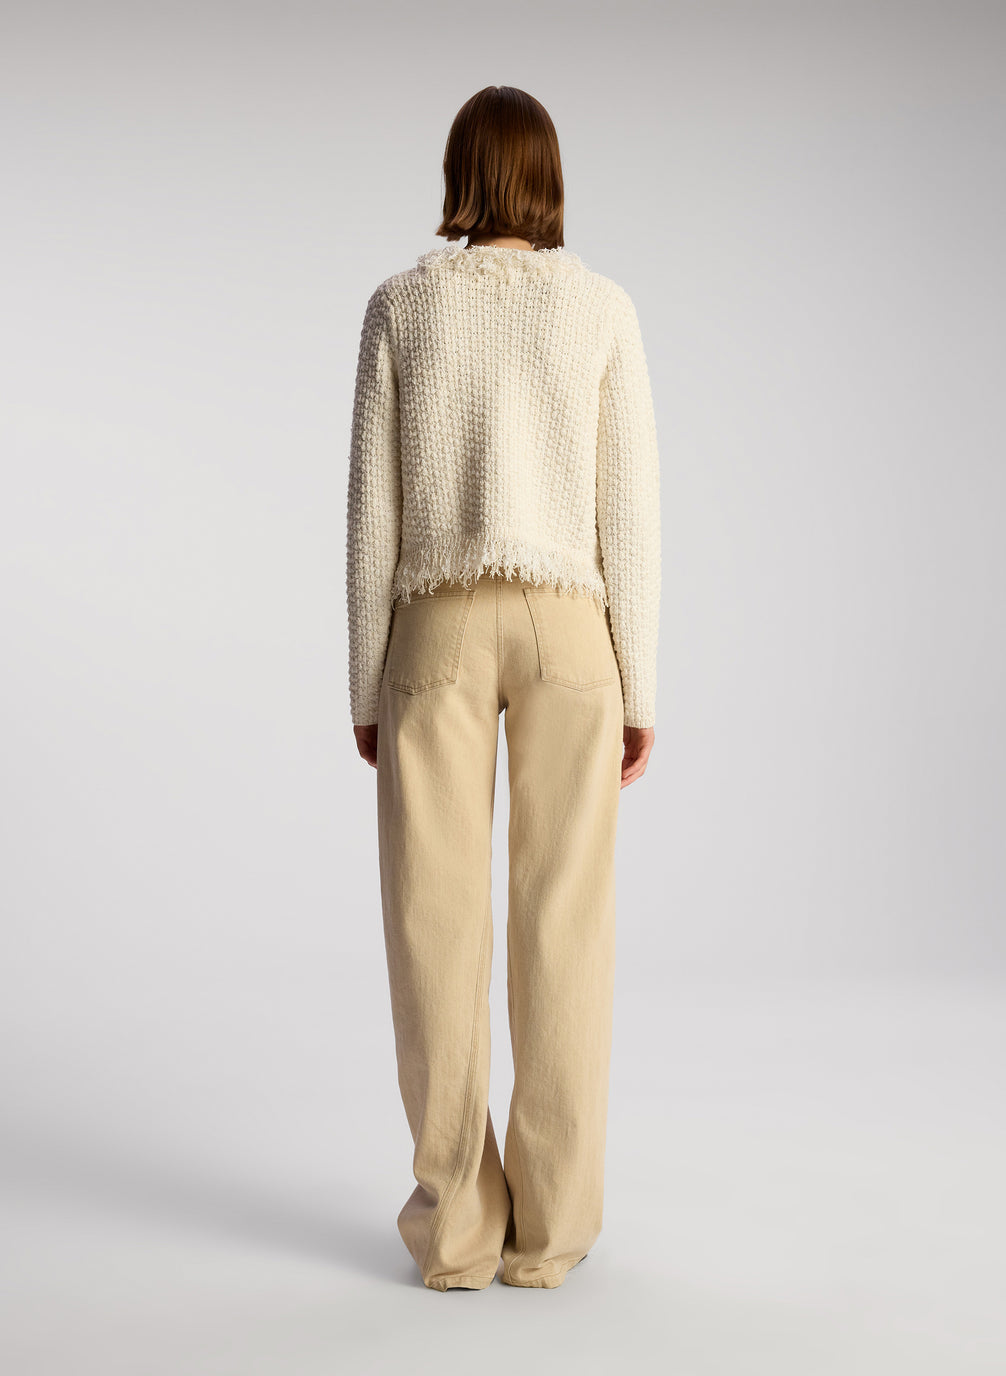 back view of woman wearing cream fringed cardigan and tan pants